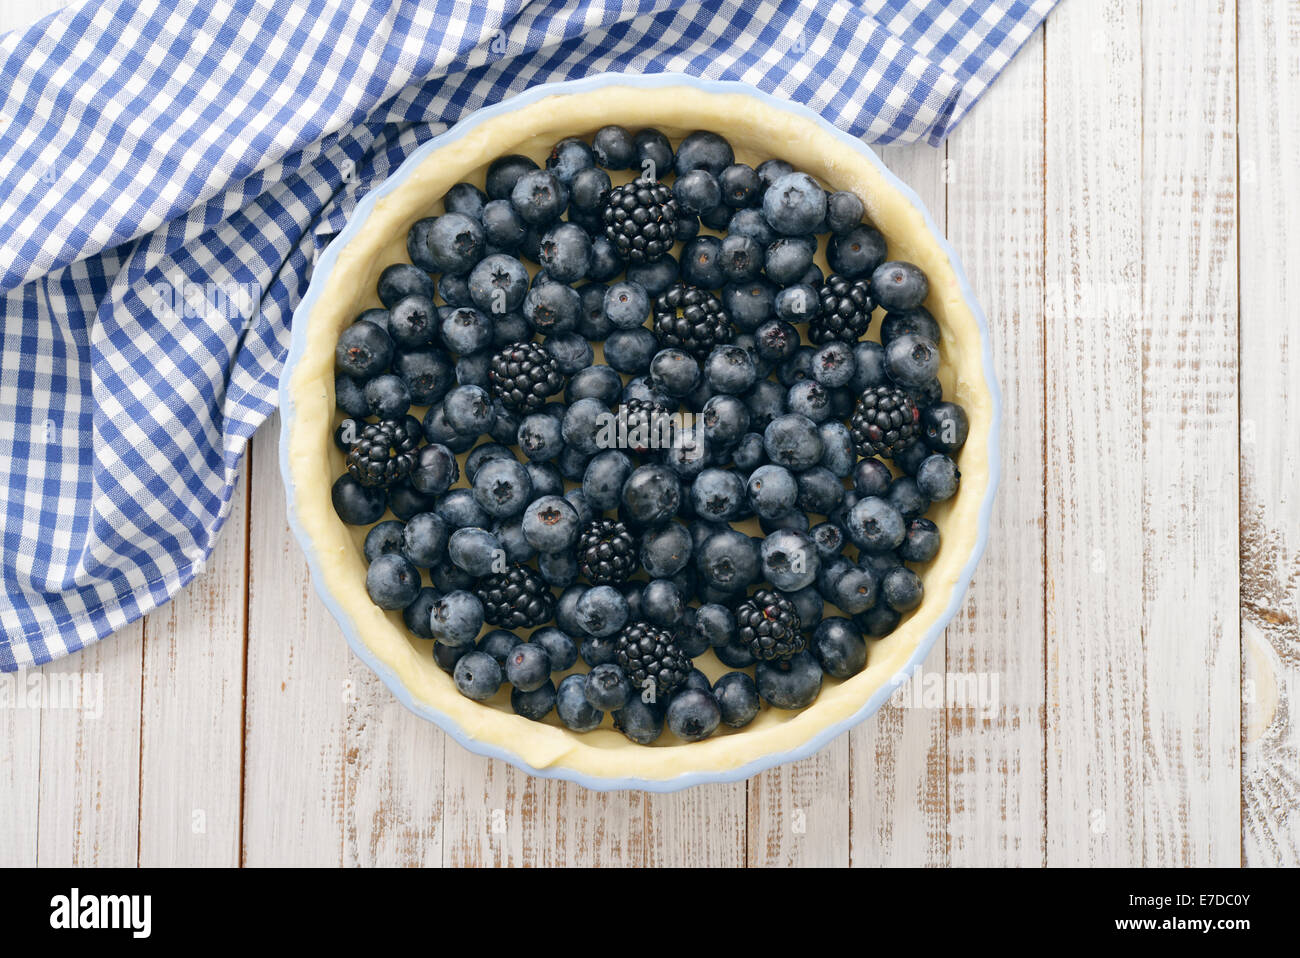 Tasty homemade pie with blueberries and blackberries on wooden table. Top view. Stock Photo